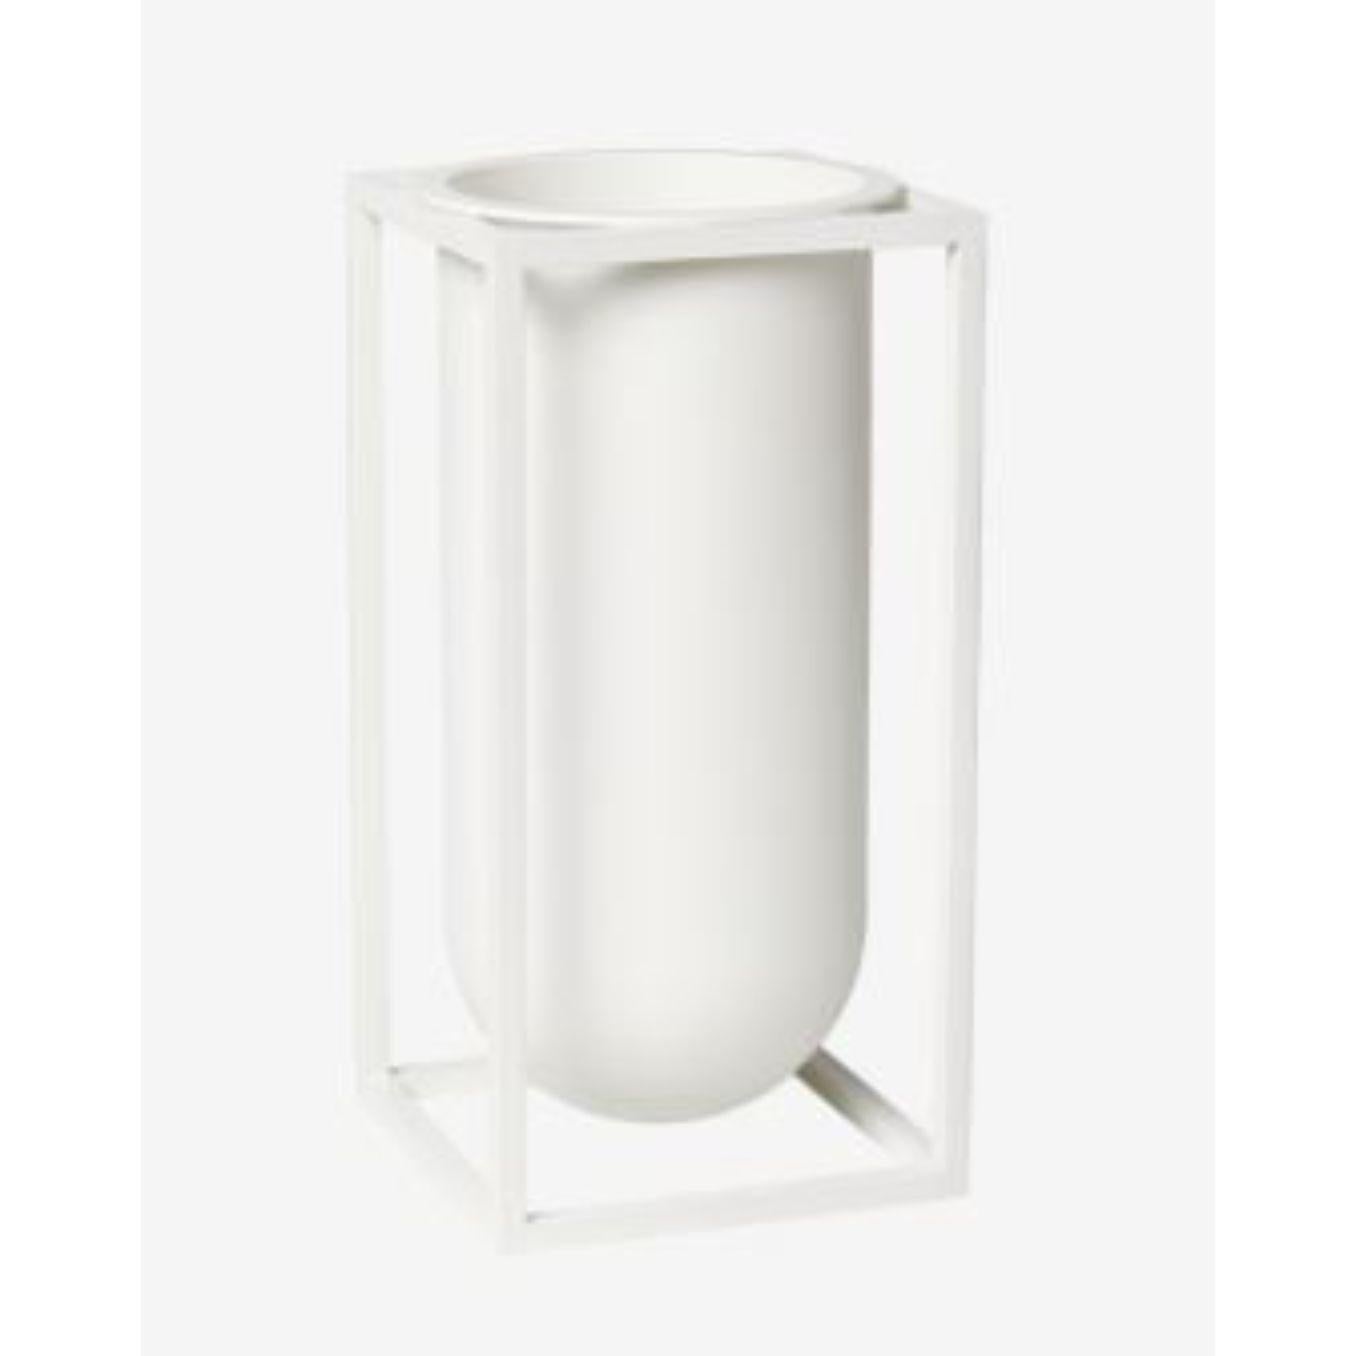 White Lily Kubus vase by Lassen
Dimensions: d 10 x w 10 x h 20 cm 
Materials: Metal 
Weight: 1.50 Kg

Kubus vase lily was designed by Søren Lassen in 2018 as the third in the series of vases in the Kubus collection. With its cylindrical